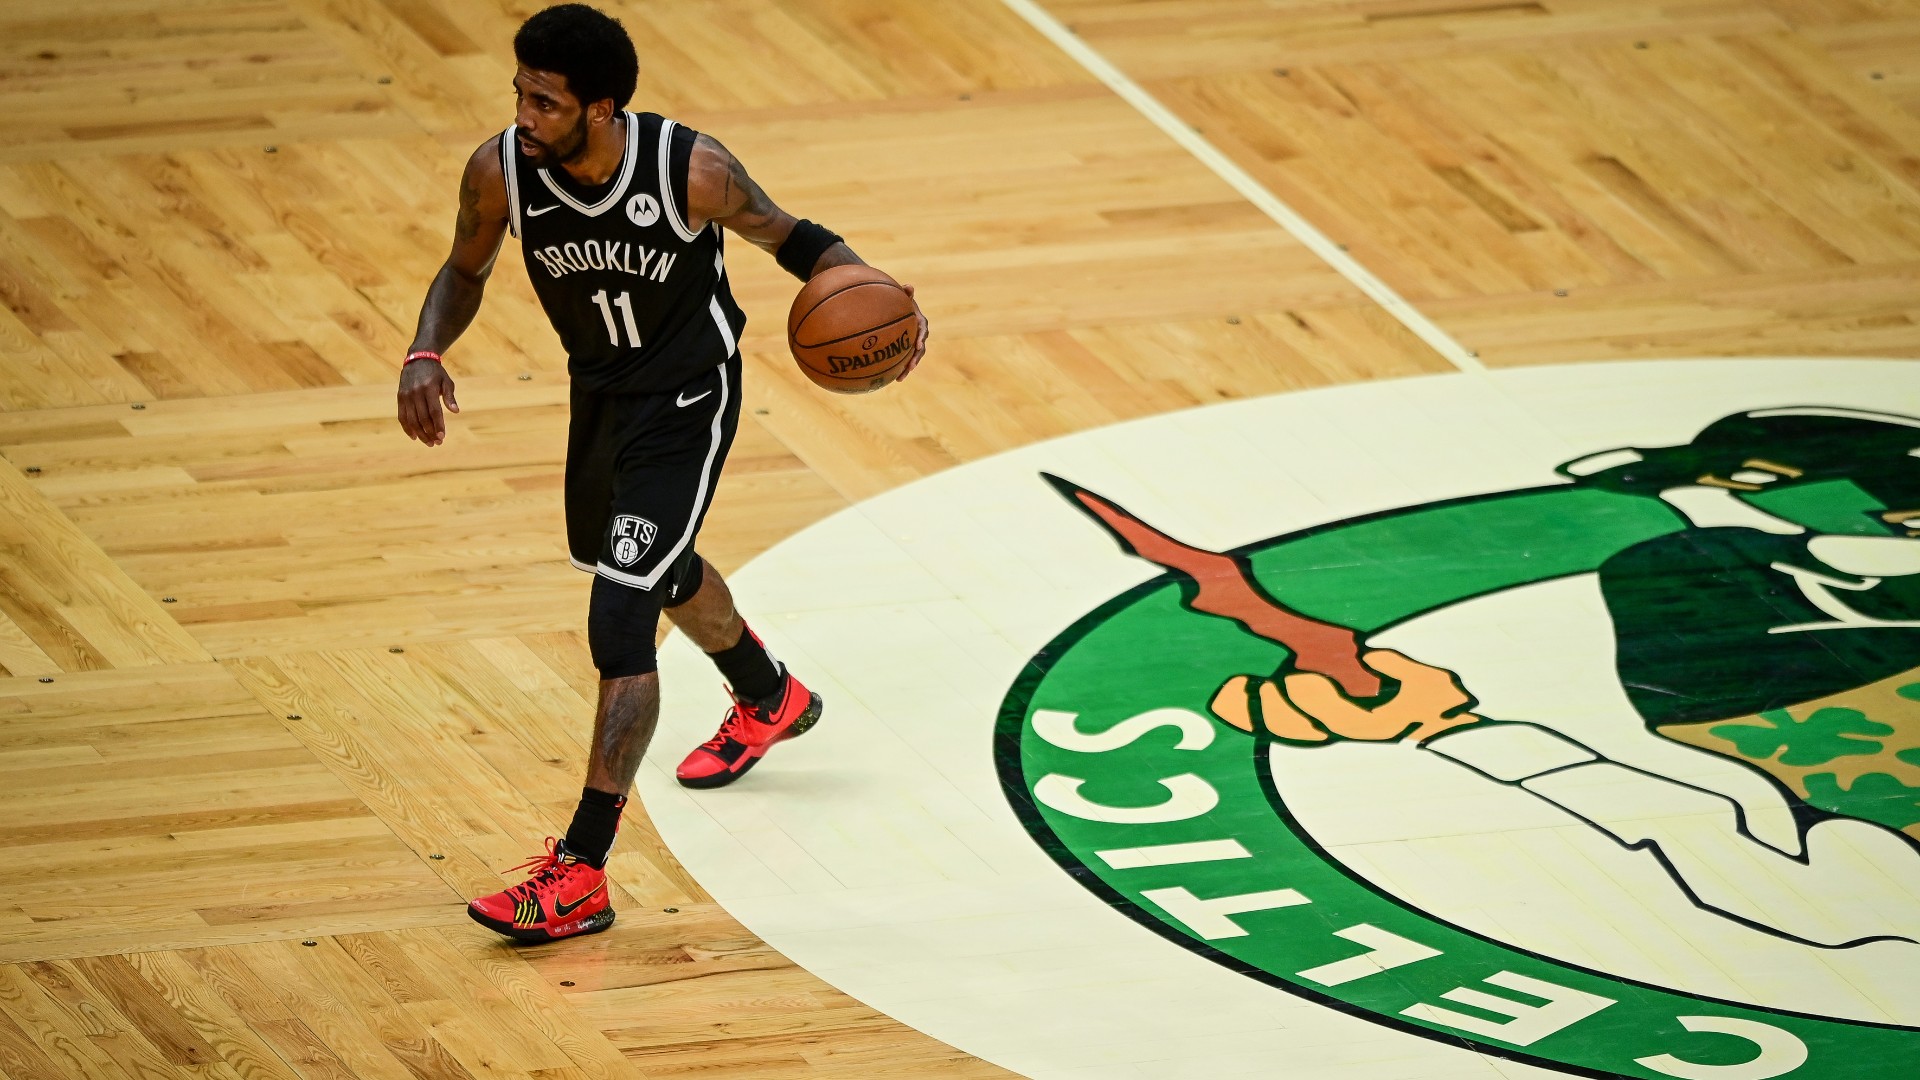 Video of kyrie irving stomping on celtics logo sparks nba twitter debate over classless act sporting news